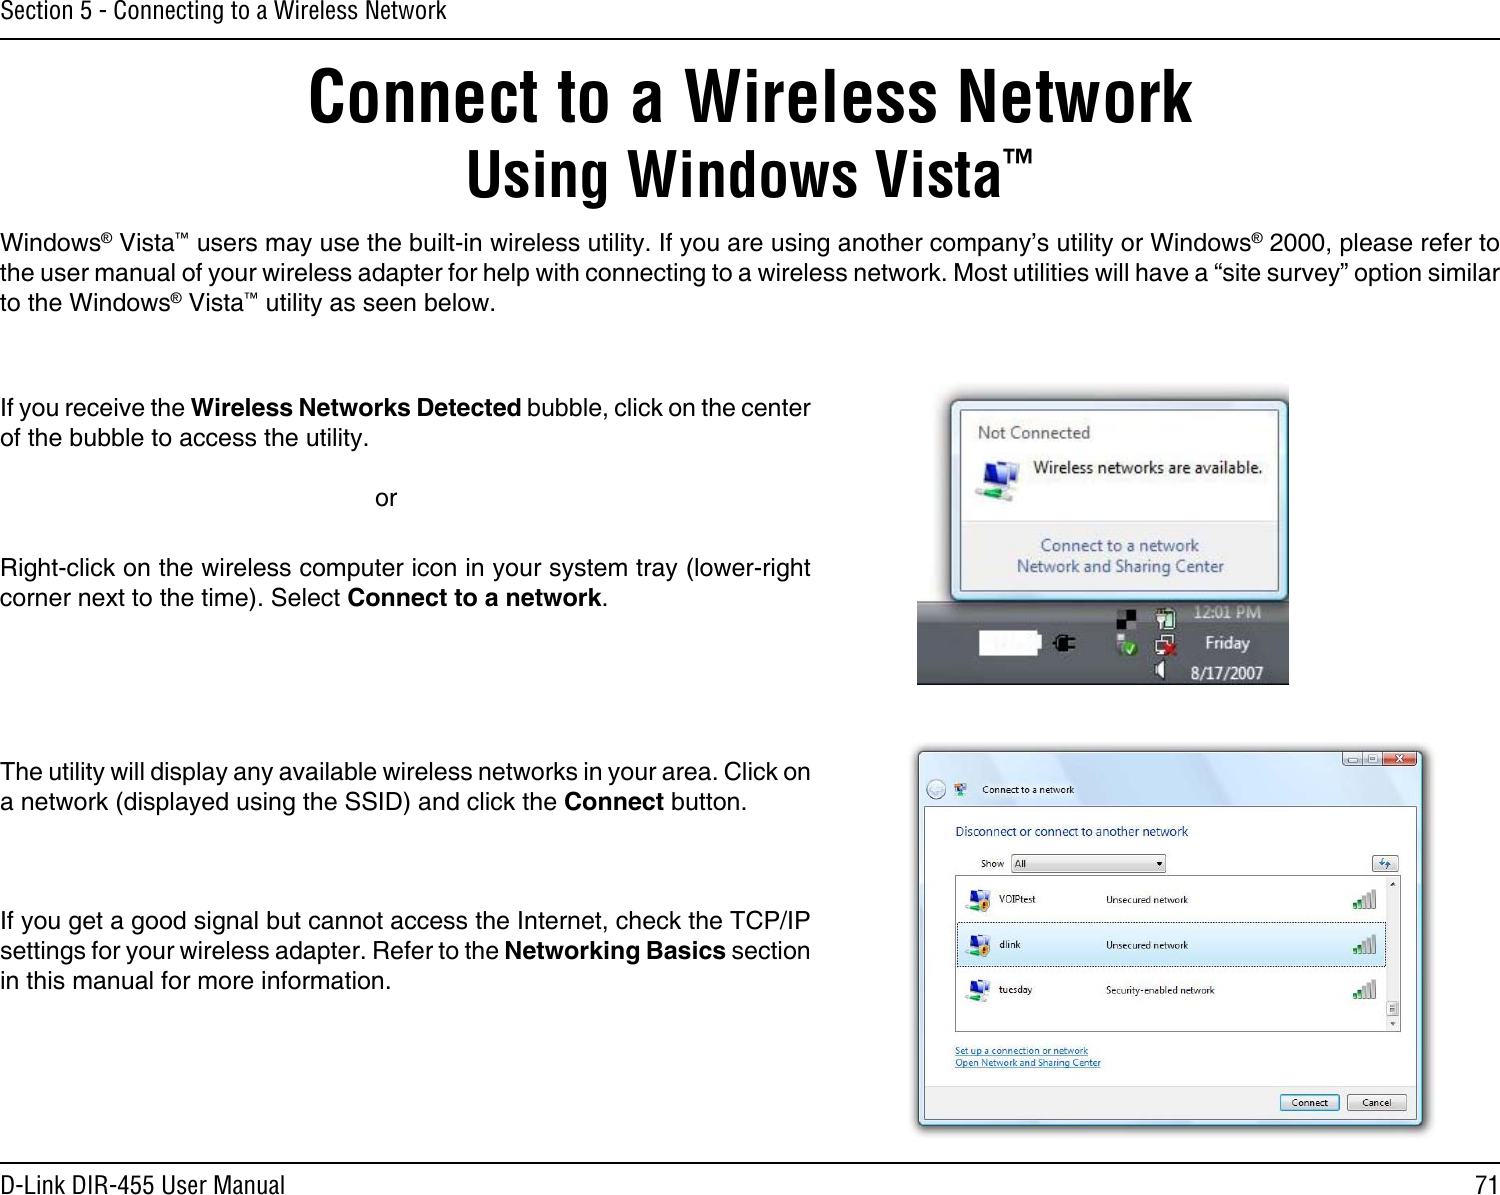 71D-Link DIR-455 User ManualSection 5 - Connecting to a Wireless NetworkConnect to a Wireless NetworkUsing Windows Vista™Windows® Vista™ users may use the built-in wireless utility. If you are using another company’s utility or Windows® 2000, please refer to the user manual of your wireless adapter for help with connecting to a wireless network. Most utilities will have a “site survey” option similar to the Windows® Vista™ utility as seen below.Right-click on the wireless computer icon in your system tray (lower-right corner next to the time). Select Connect to a network.If you receive the Wireless Networks Detected bubble, click on the center of the bubble to access the utility.     orThe utility will display any available wireless networks in your area. Click on a network (displayed using the SSID) and click the Connect button.If you get a good signal but cannot access the Internet, check the TCP/IP settings for your wireless adapter. Refer to the Networking Basics section in this manual for more information.